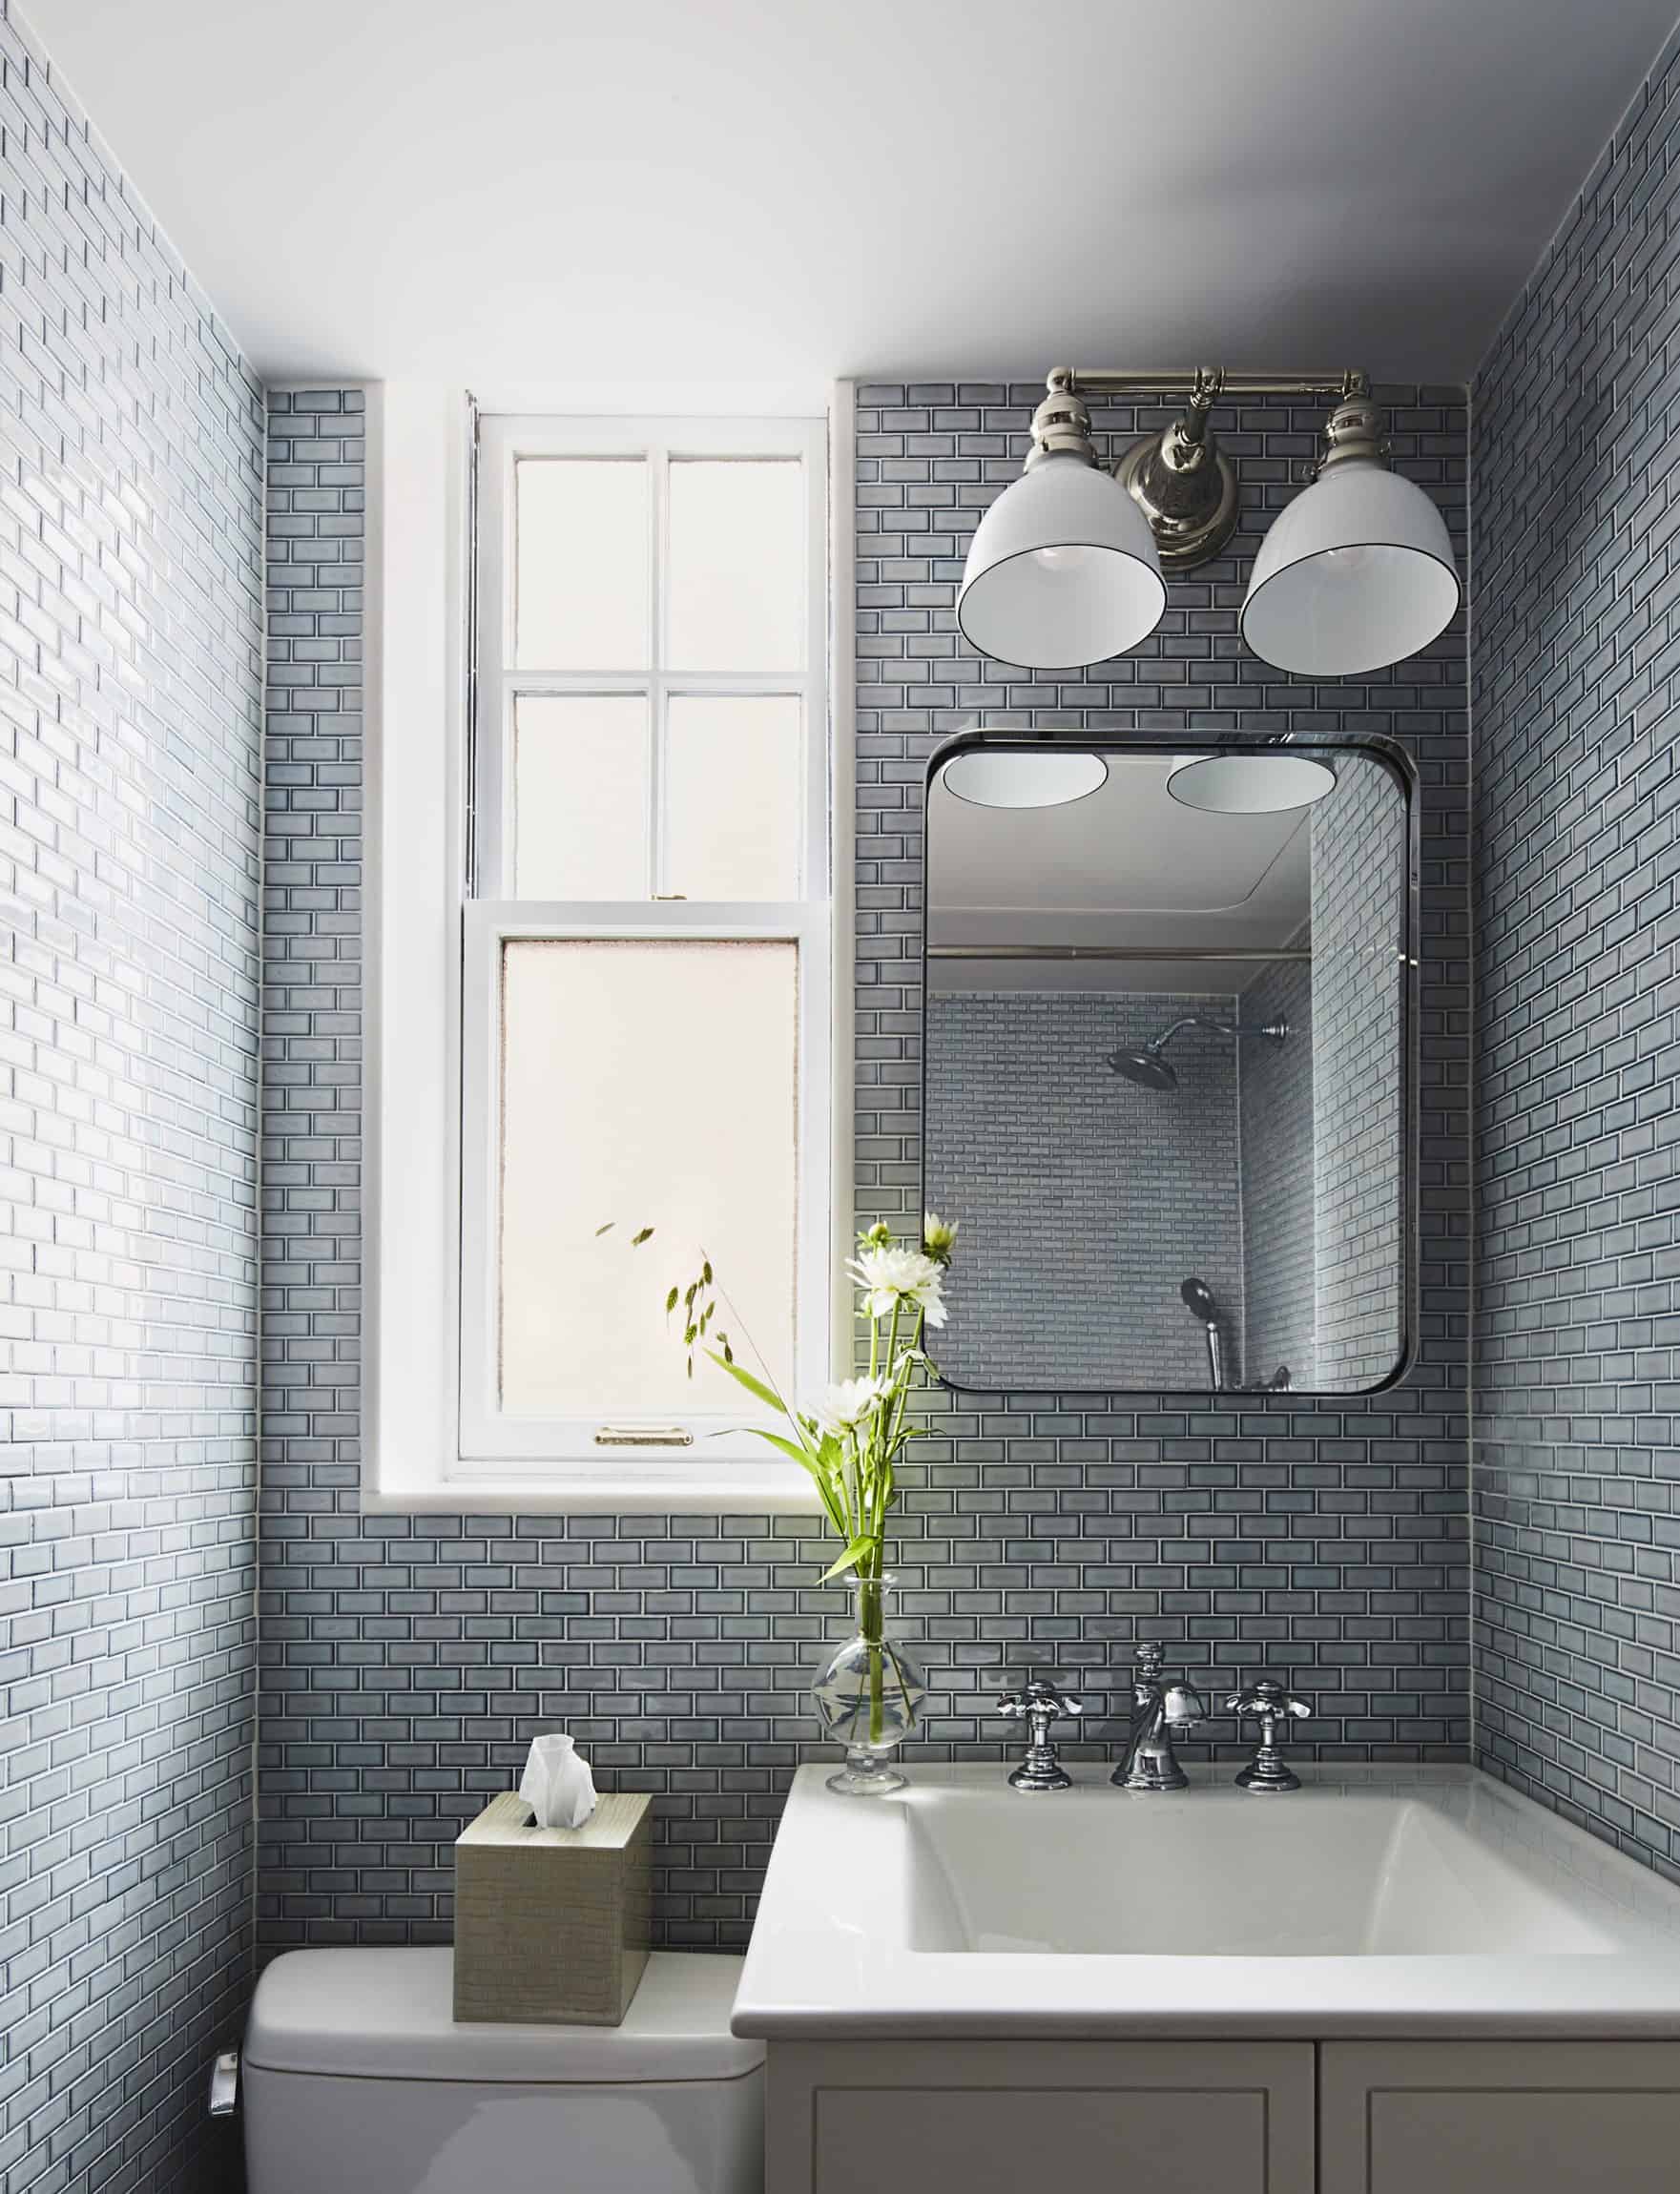 Enchanting Bathrooms With Subway Tiles, Bathrooms With Subway Tile